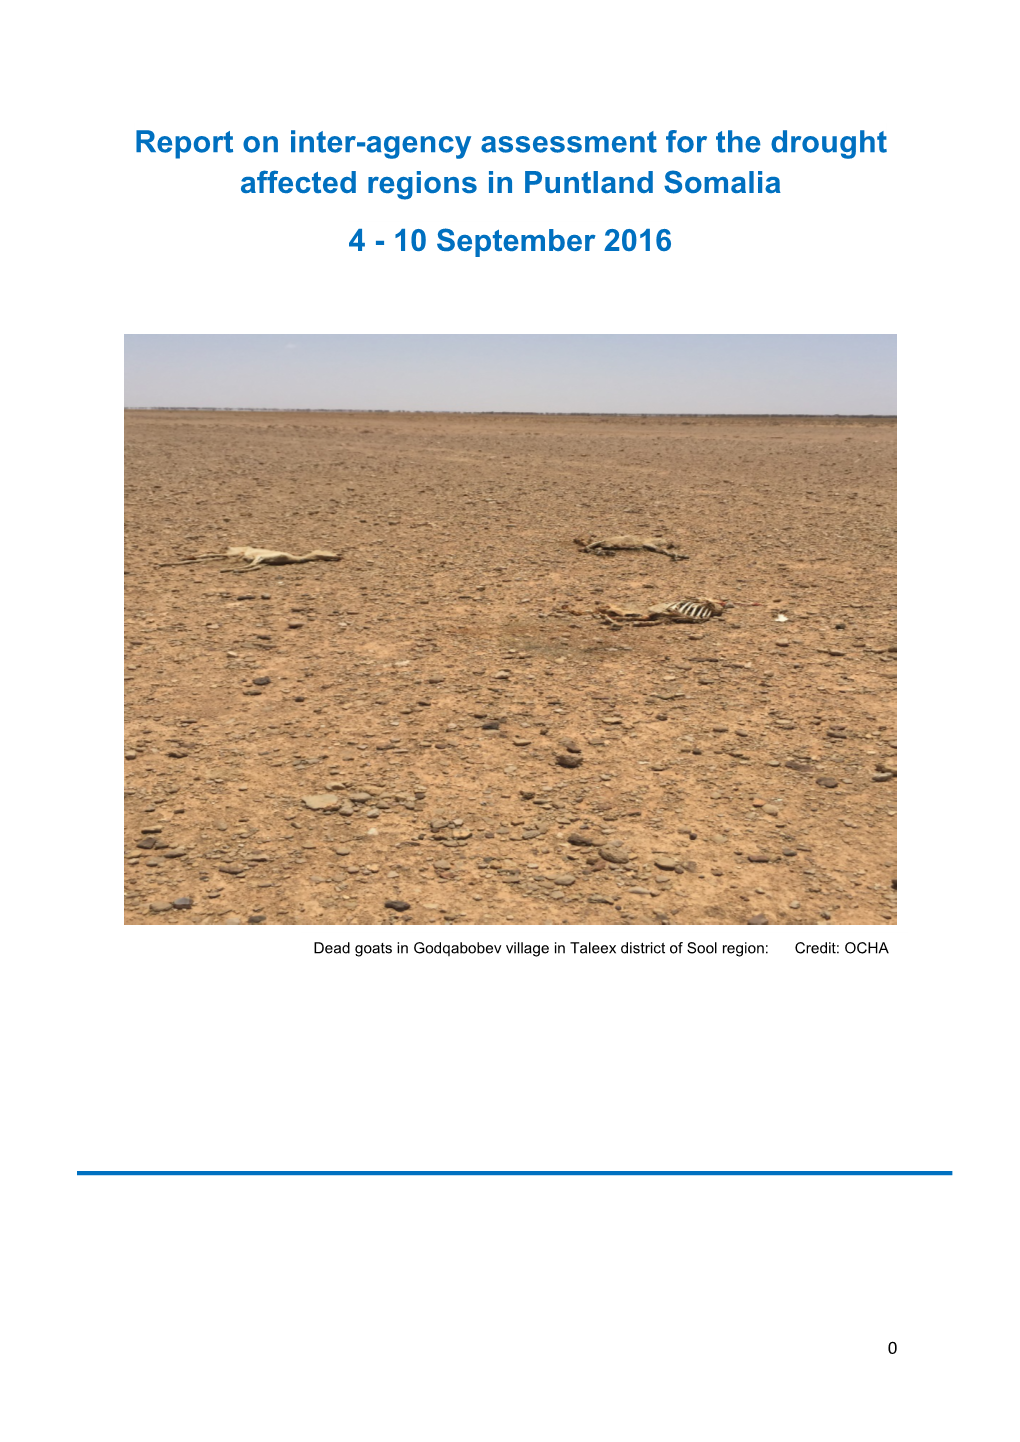 Report on Inter-Agency Assessment for the Drought Affected Regions in Puntland Somalia 4 - 10 September 2016